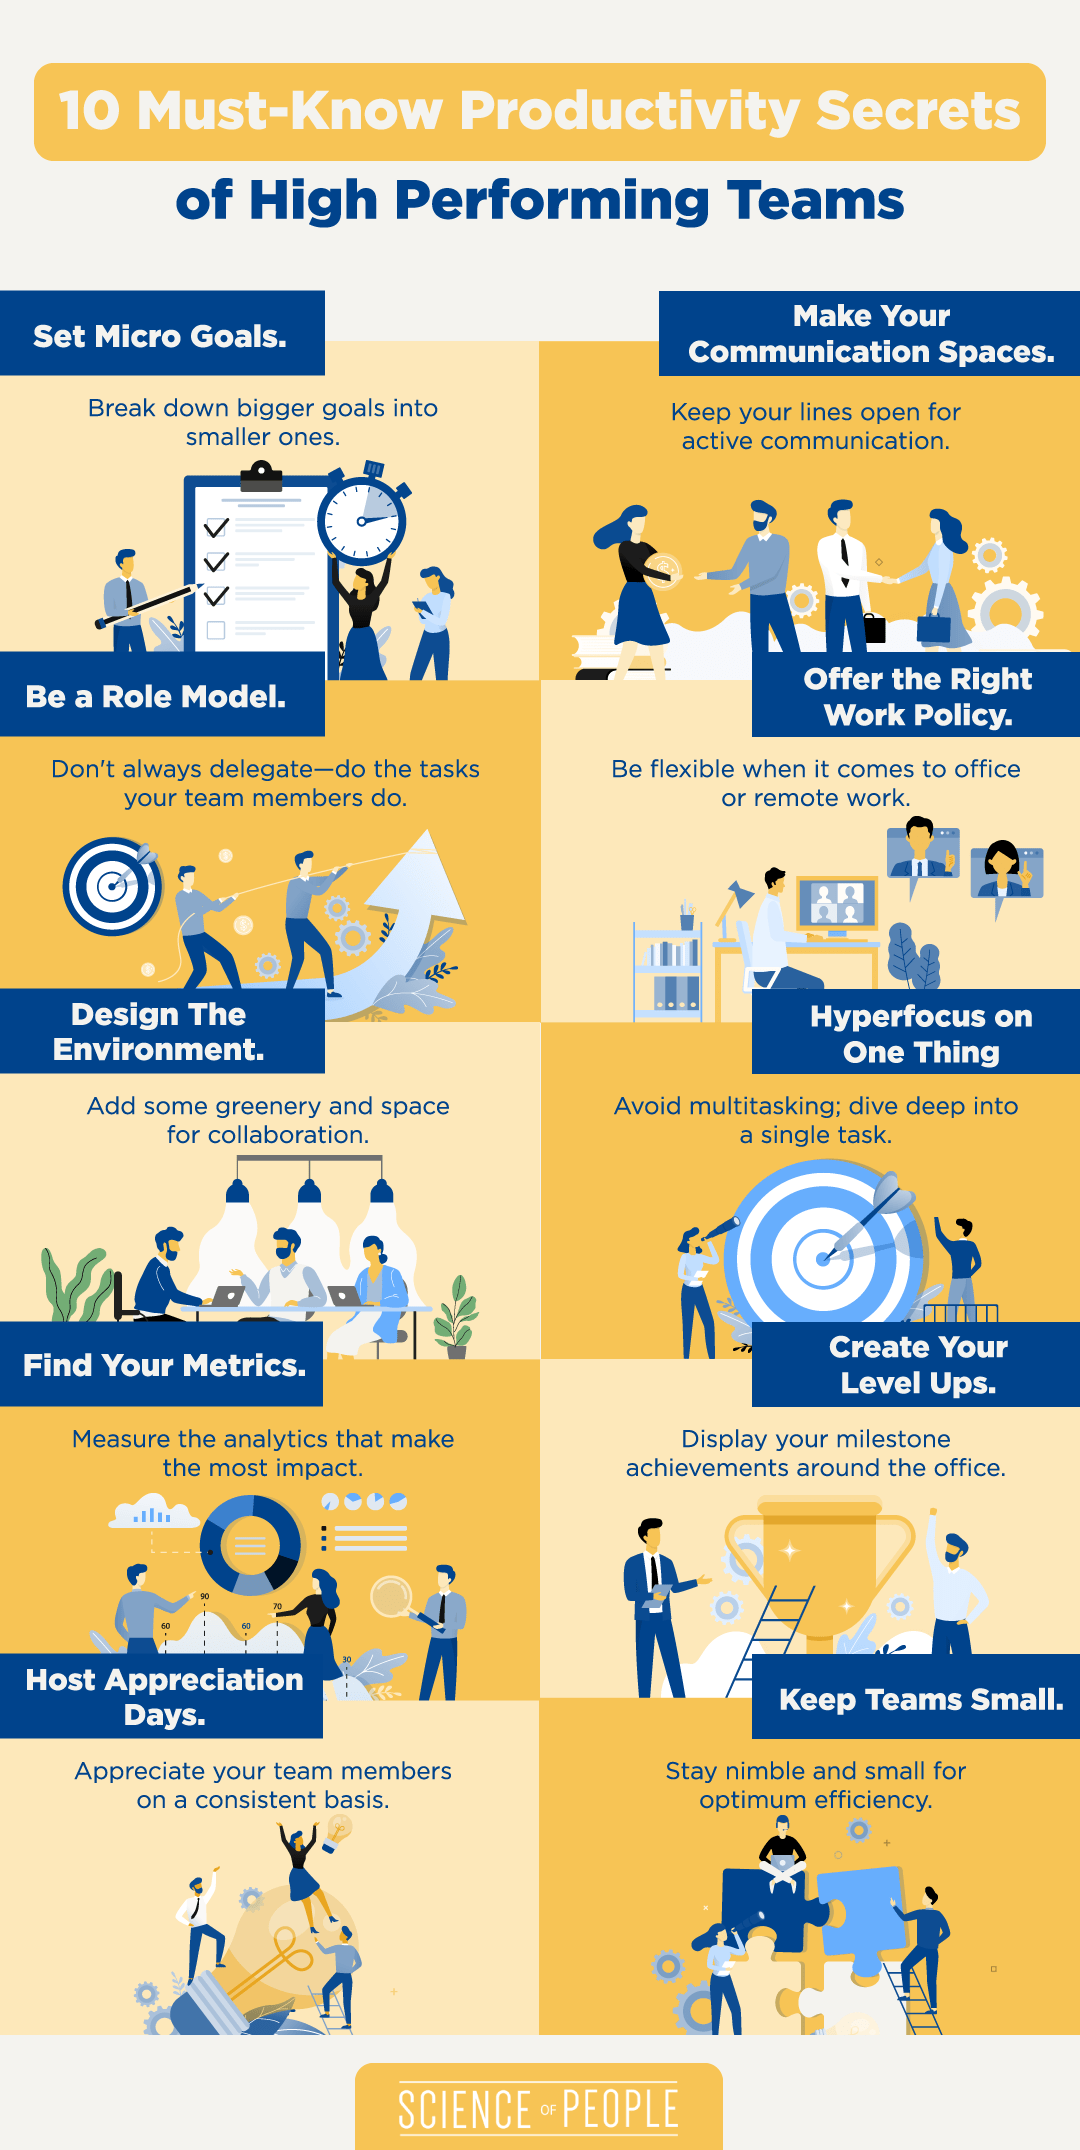 10 Must-Know Productivity Secrets
of High Performing Teams infographic